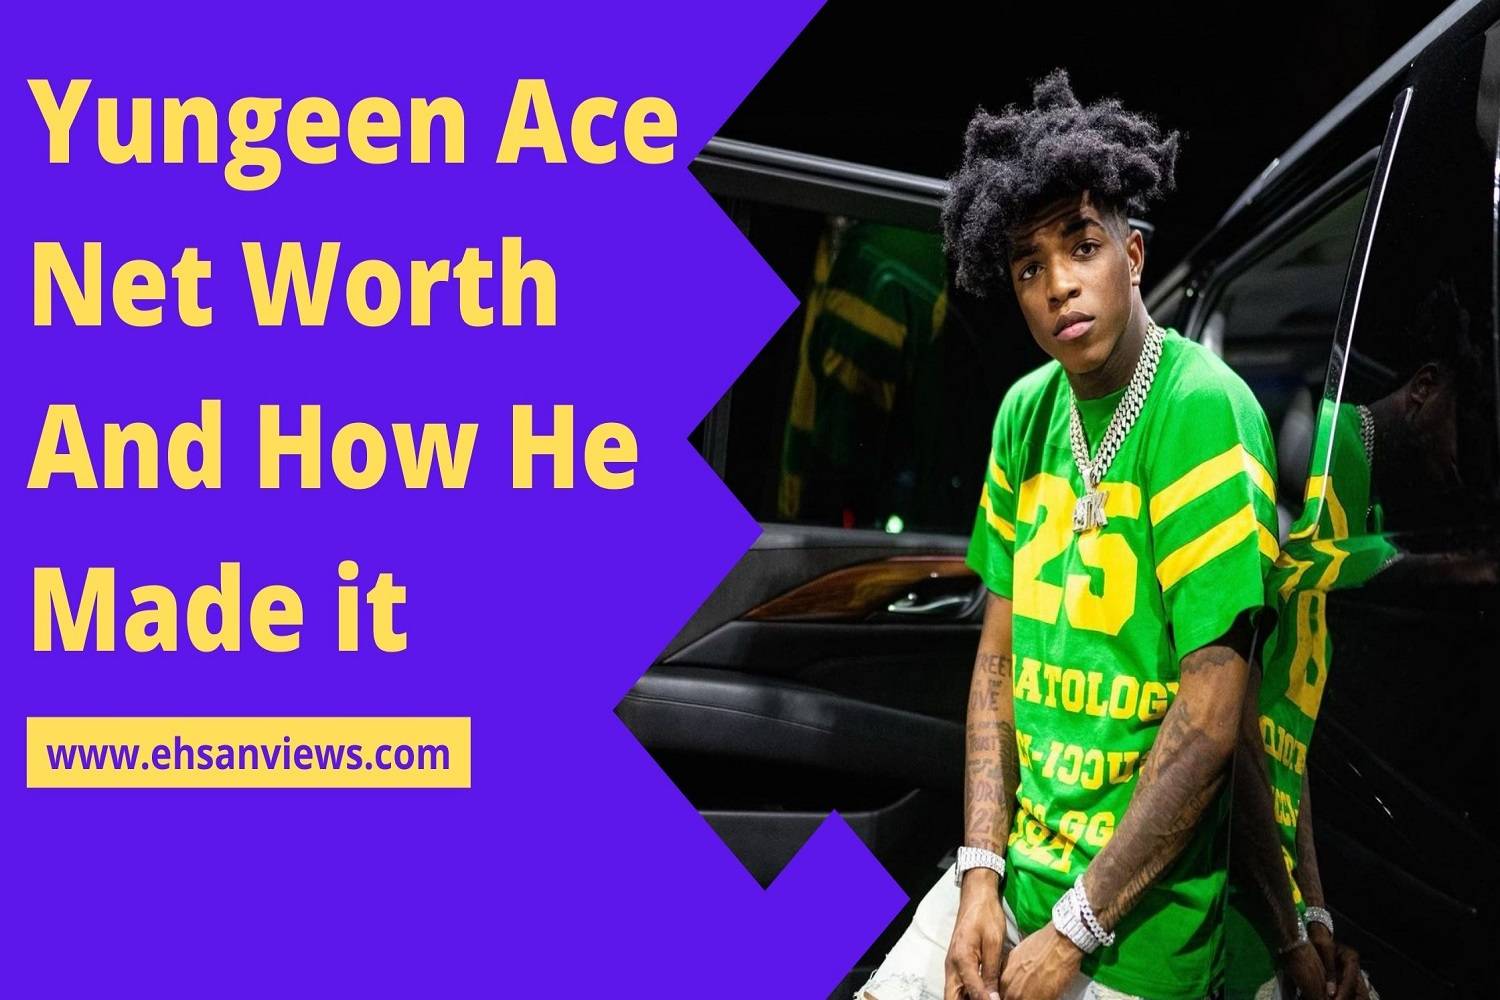 Yungeen Ace Net Worth And How He Made it - 2022 | Abdul Ehsan | Entrepreneur and Digital Marketing Consultant in Sri Lanka